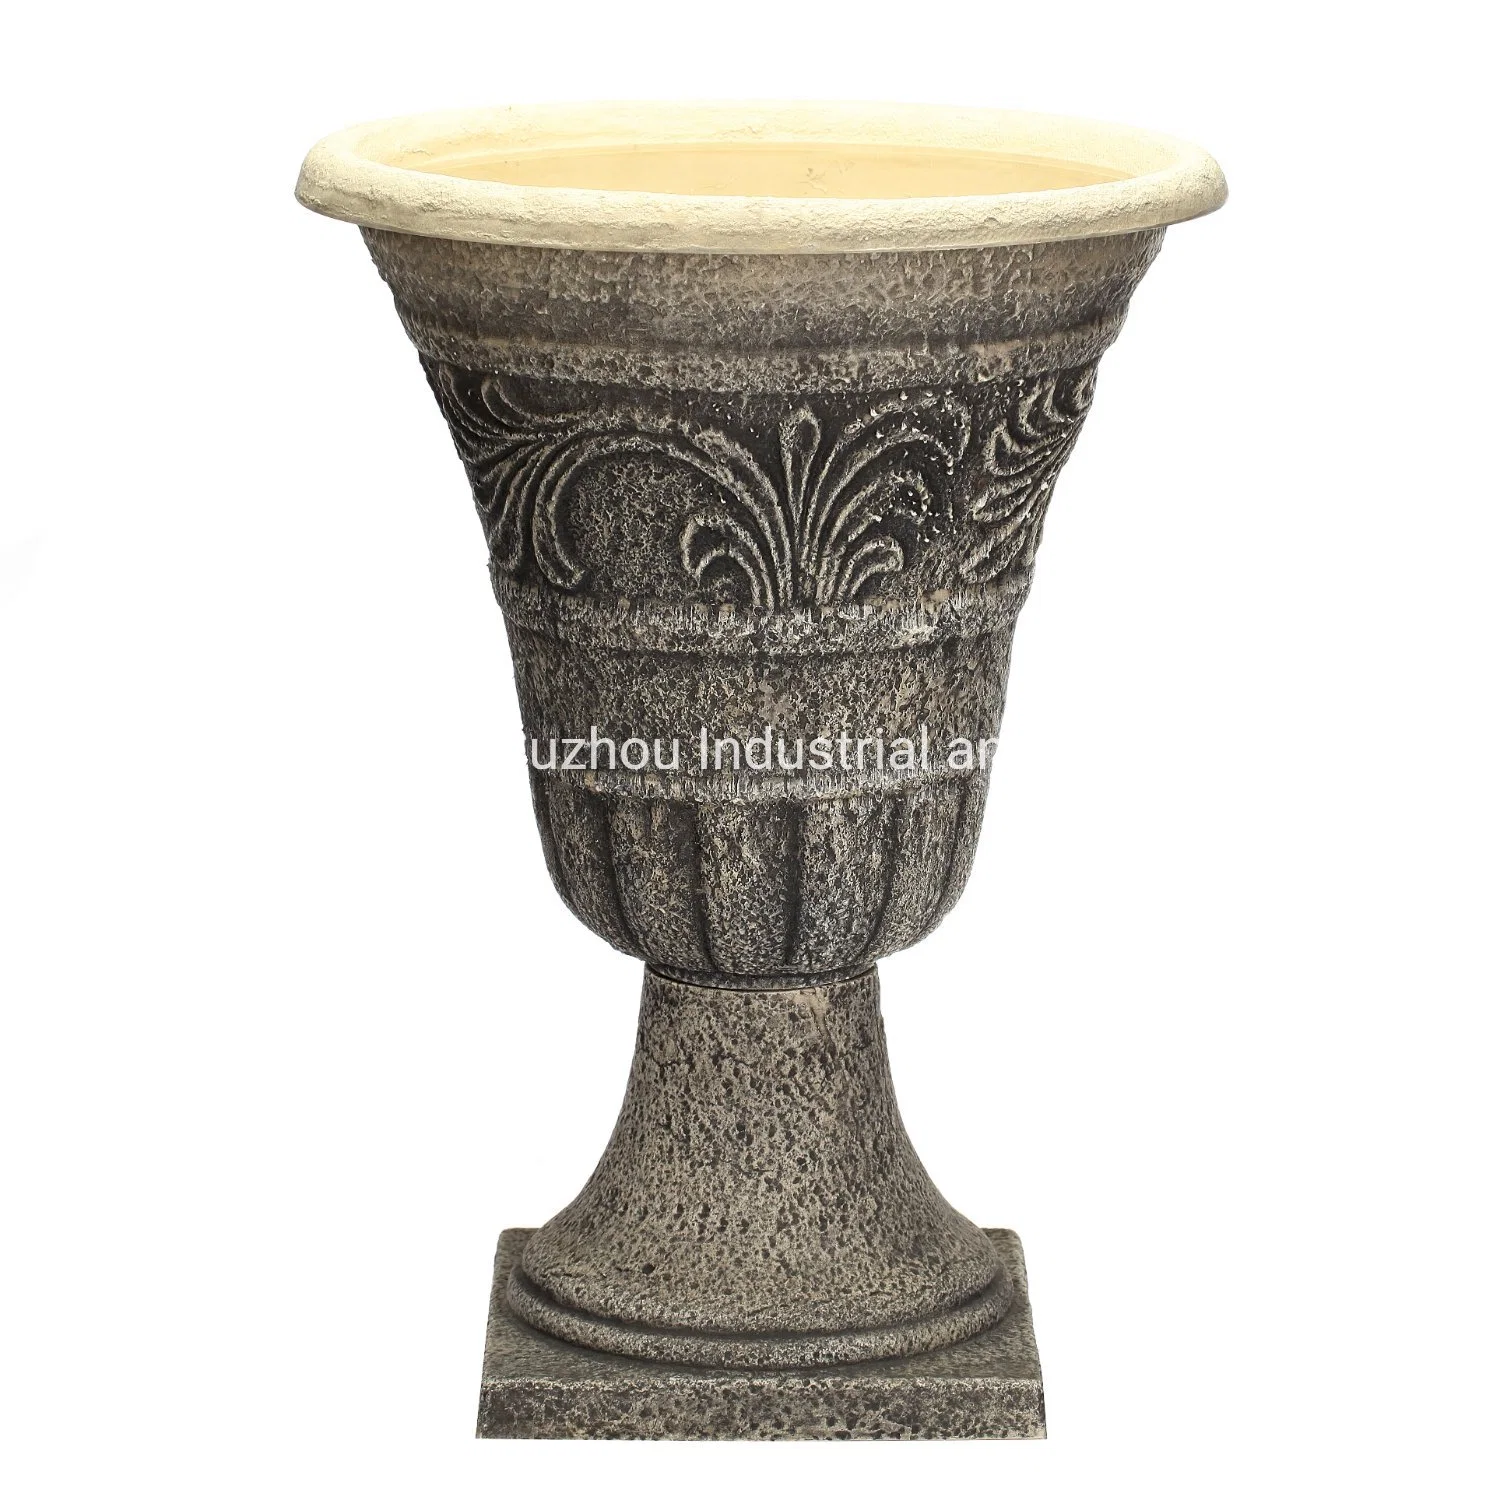 Factory Directly Sale High quality/High cost performance Durable WPC Flower Pots 20" Tumble Scroll Round Urn Plastic Flower Pot Plant Pot Garden Planter a